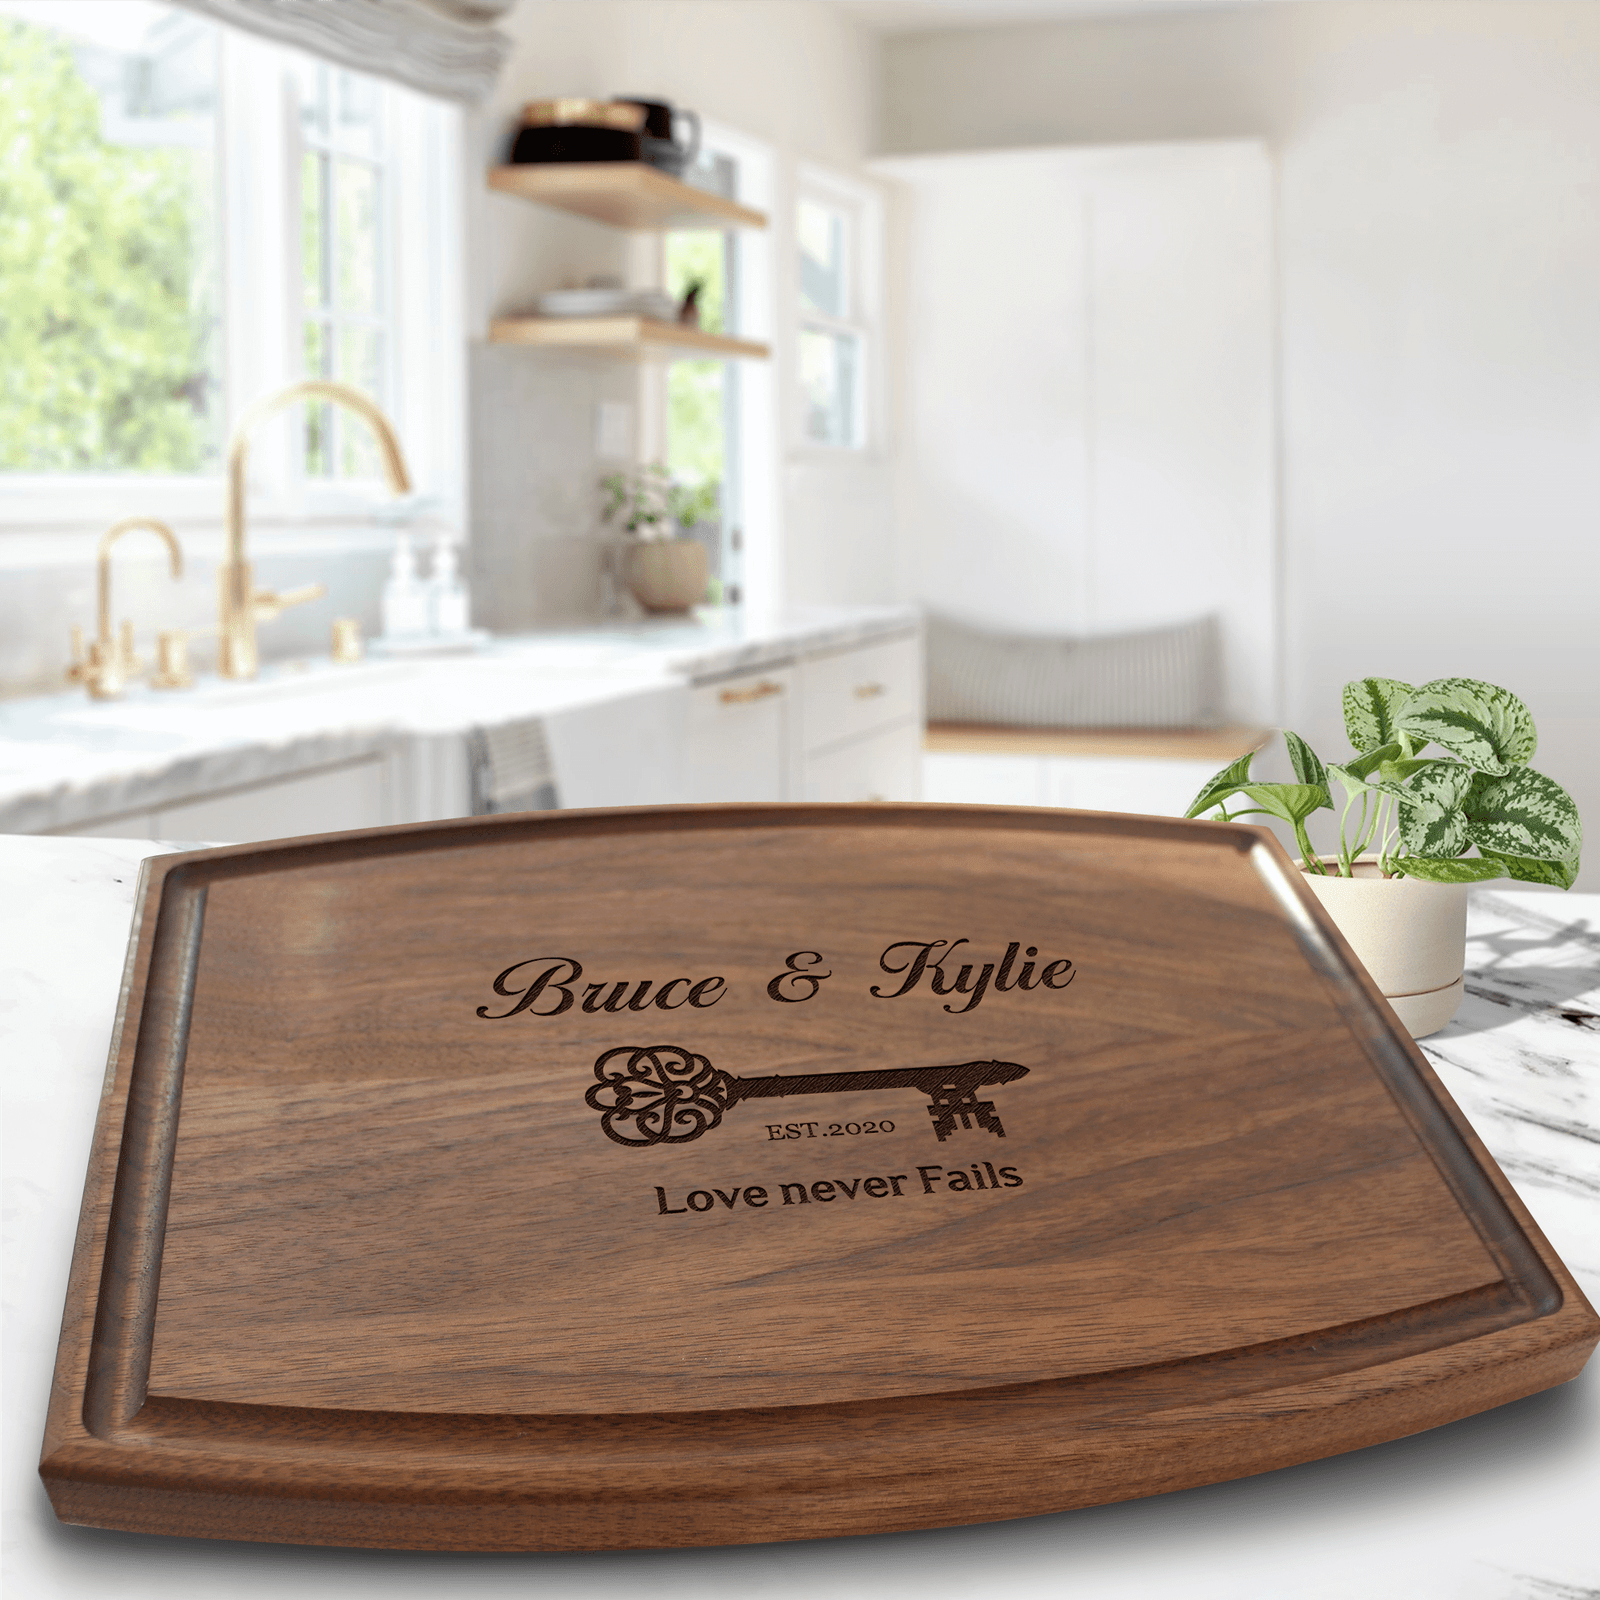 Best Family Gifts and Real Estate Agent Closing Gifts - Premium Wooden Cutting Board for Cooking Enthusiasts - Aspera Design Store's